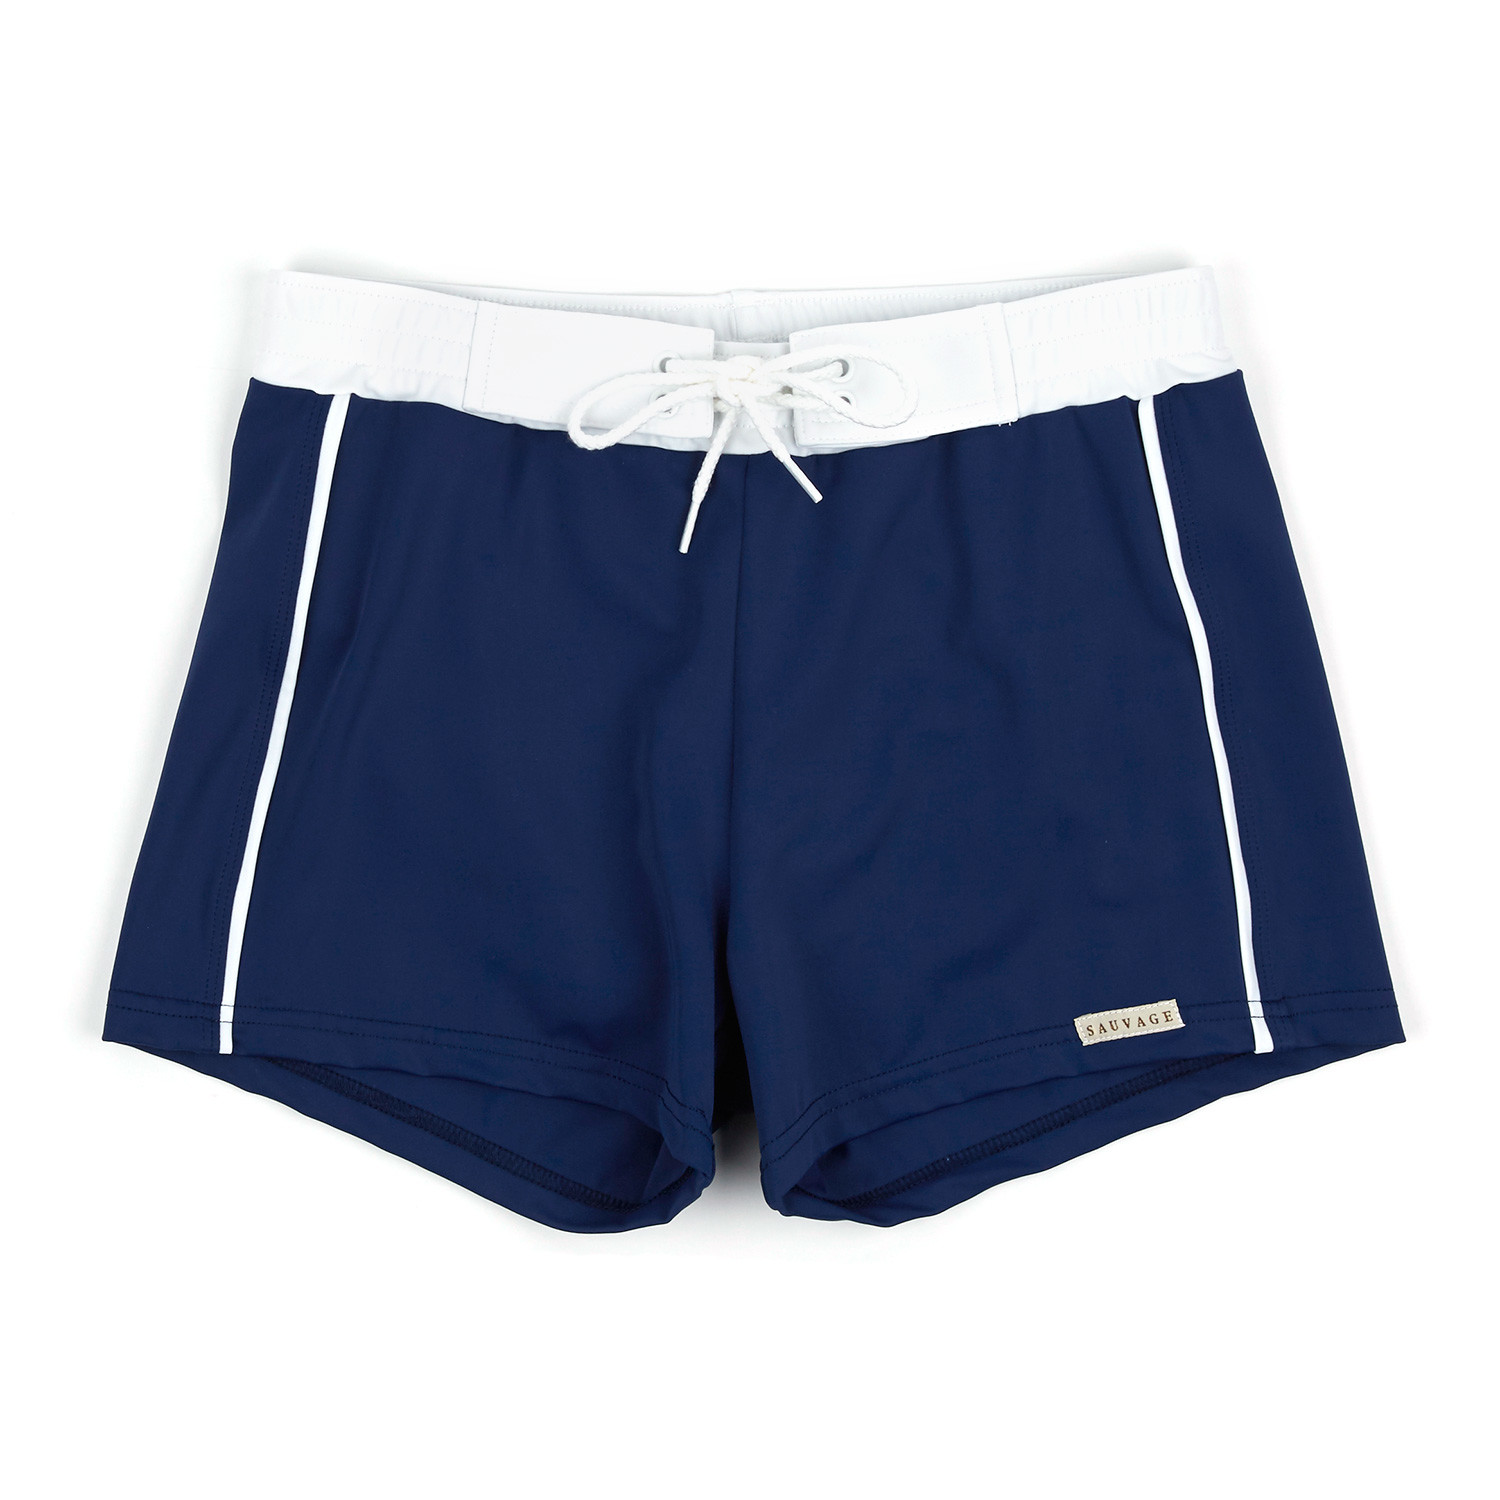 Banded Swim Short // Navy (S) - Sauvage Swimwear - Touch of Modern